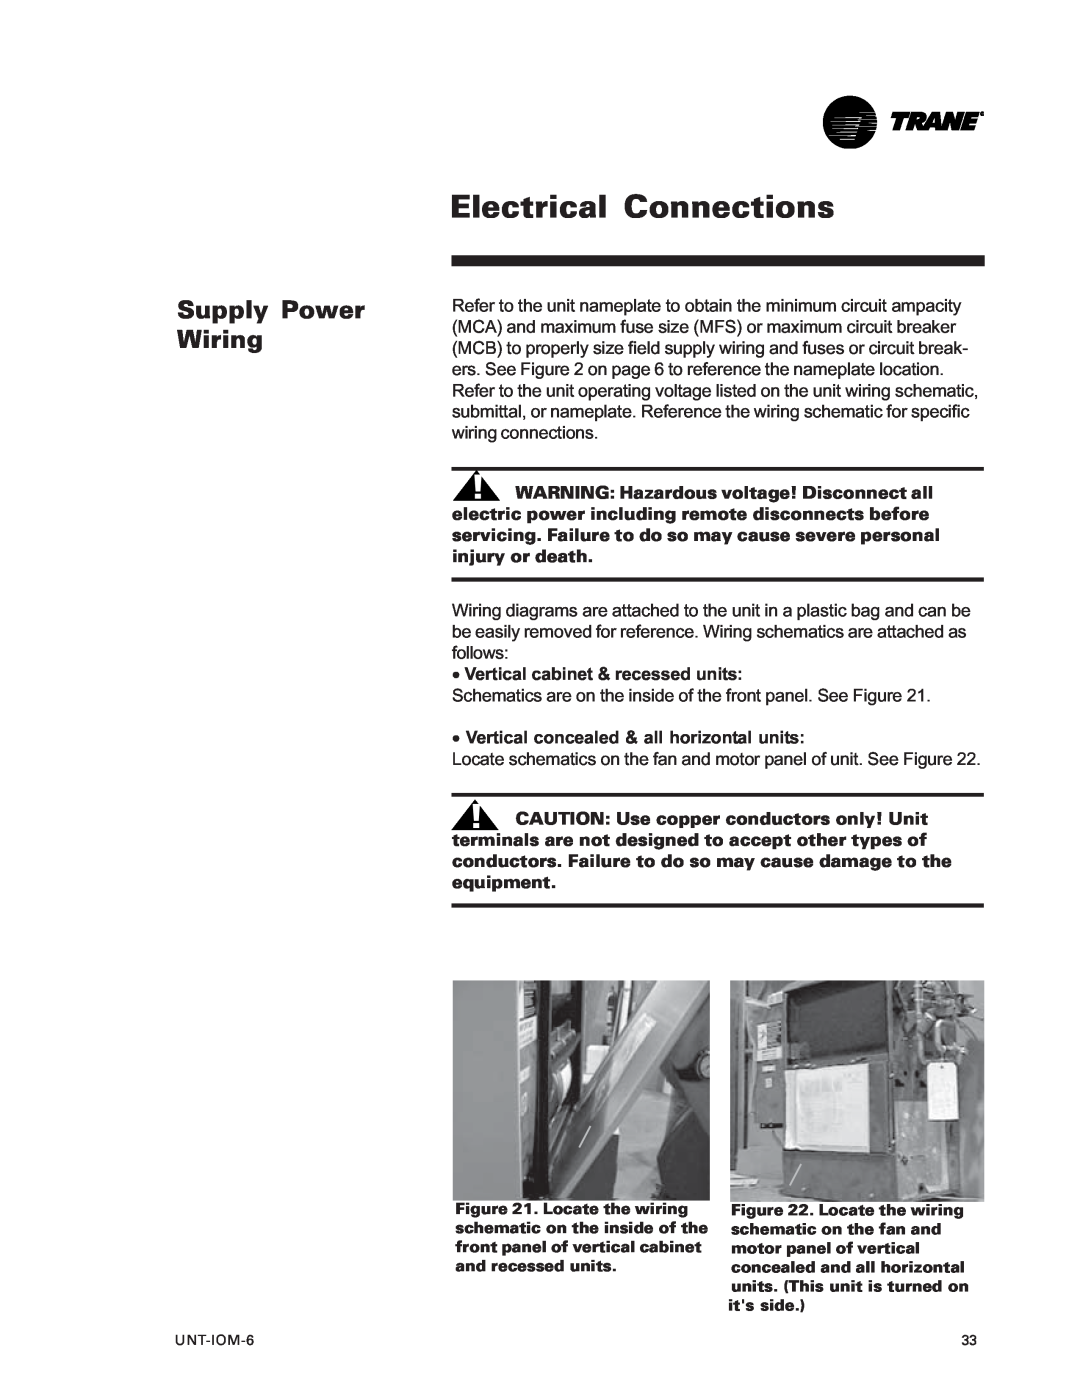 Trane LO manual Electrical Connections, Supply Power Wiring, ·Vertical cabinet & recessed units 